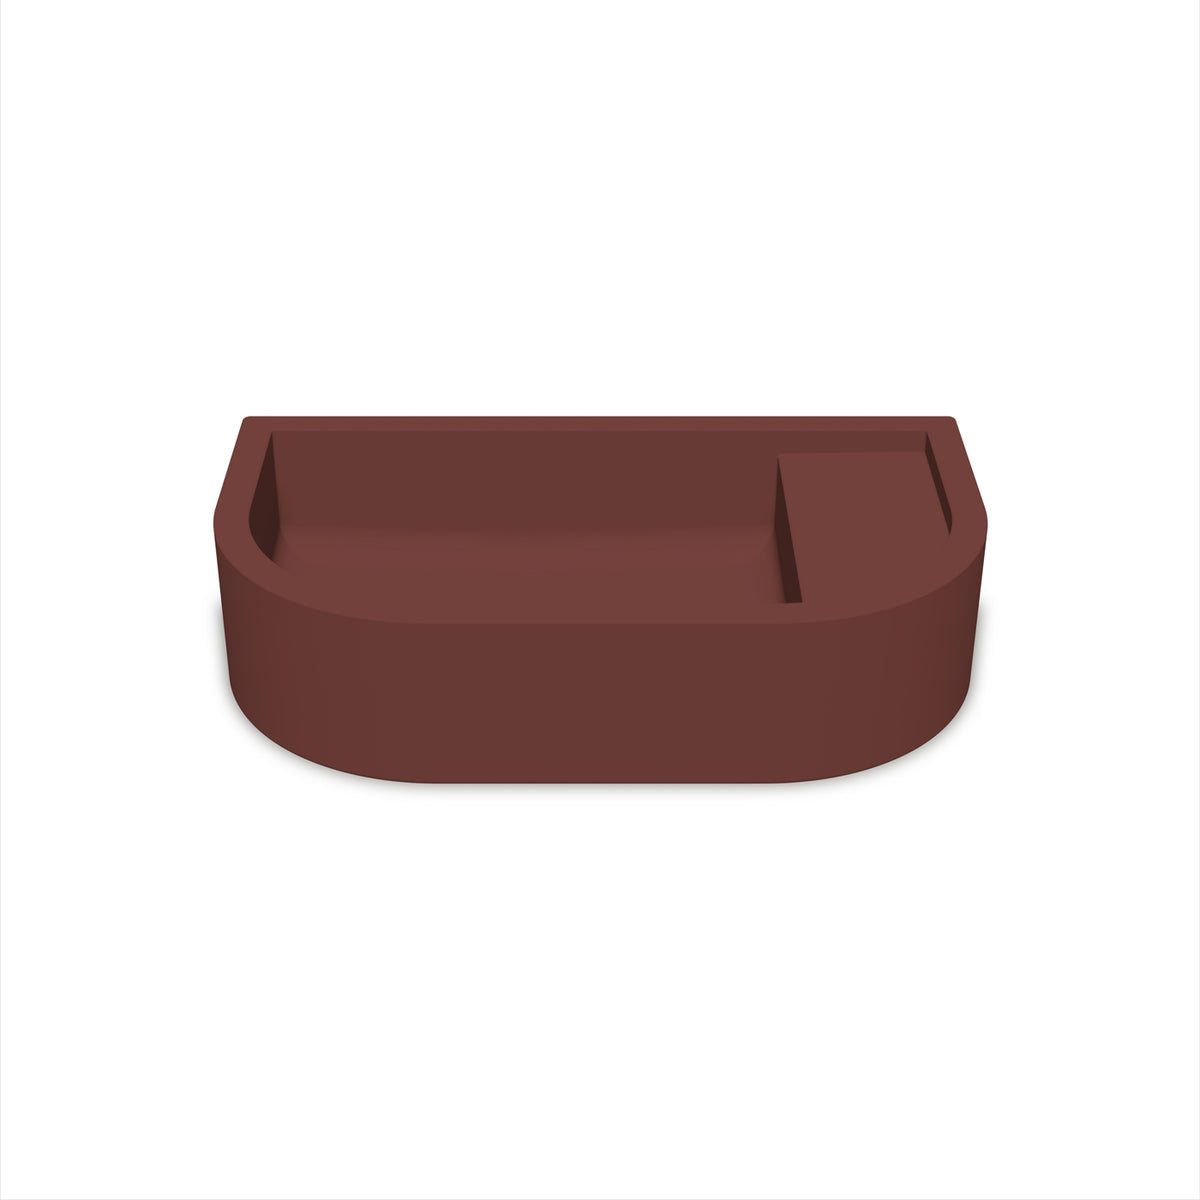 Loop 02 Basin - Overflow - Surface Mount (Clay,No Tap Hole,White)